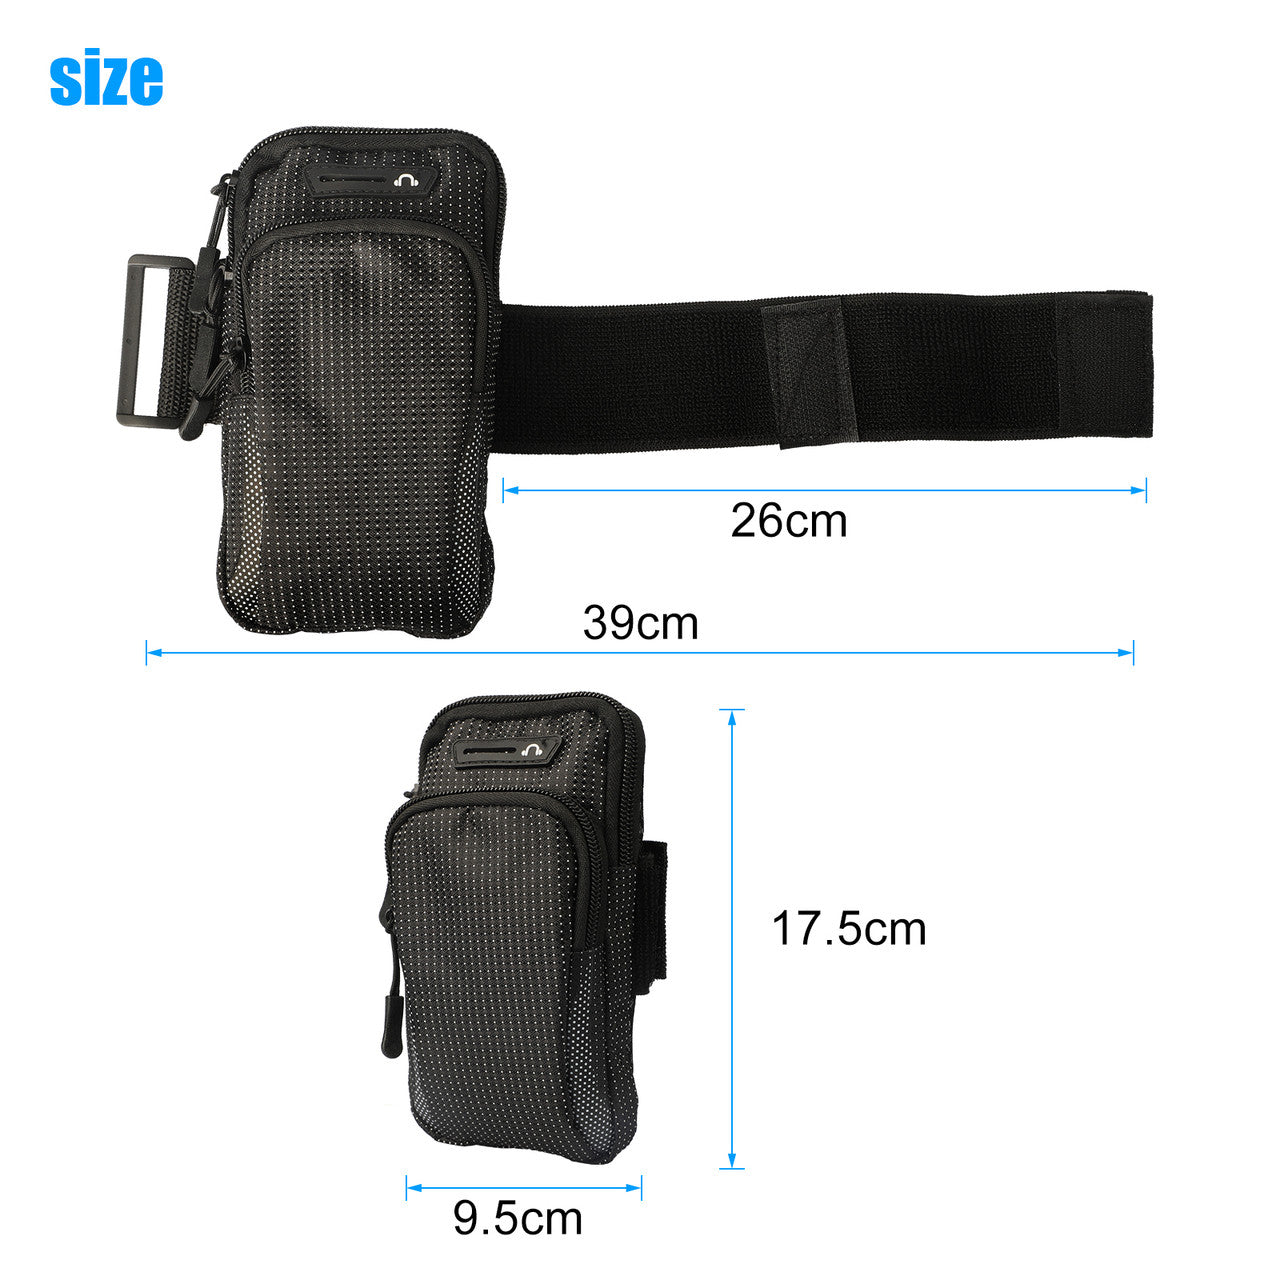 Universal Sports Arm Bag Phone Holder Pouch Case Running, Fitness Compatible with iPhone, Samsung